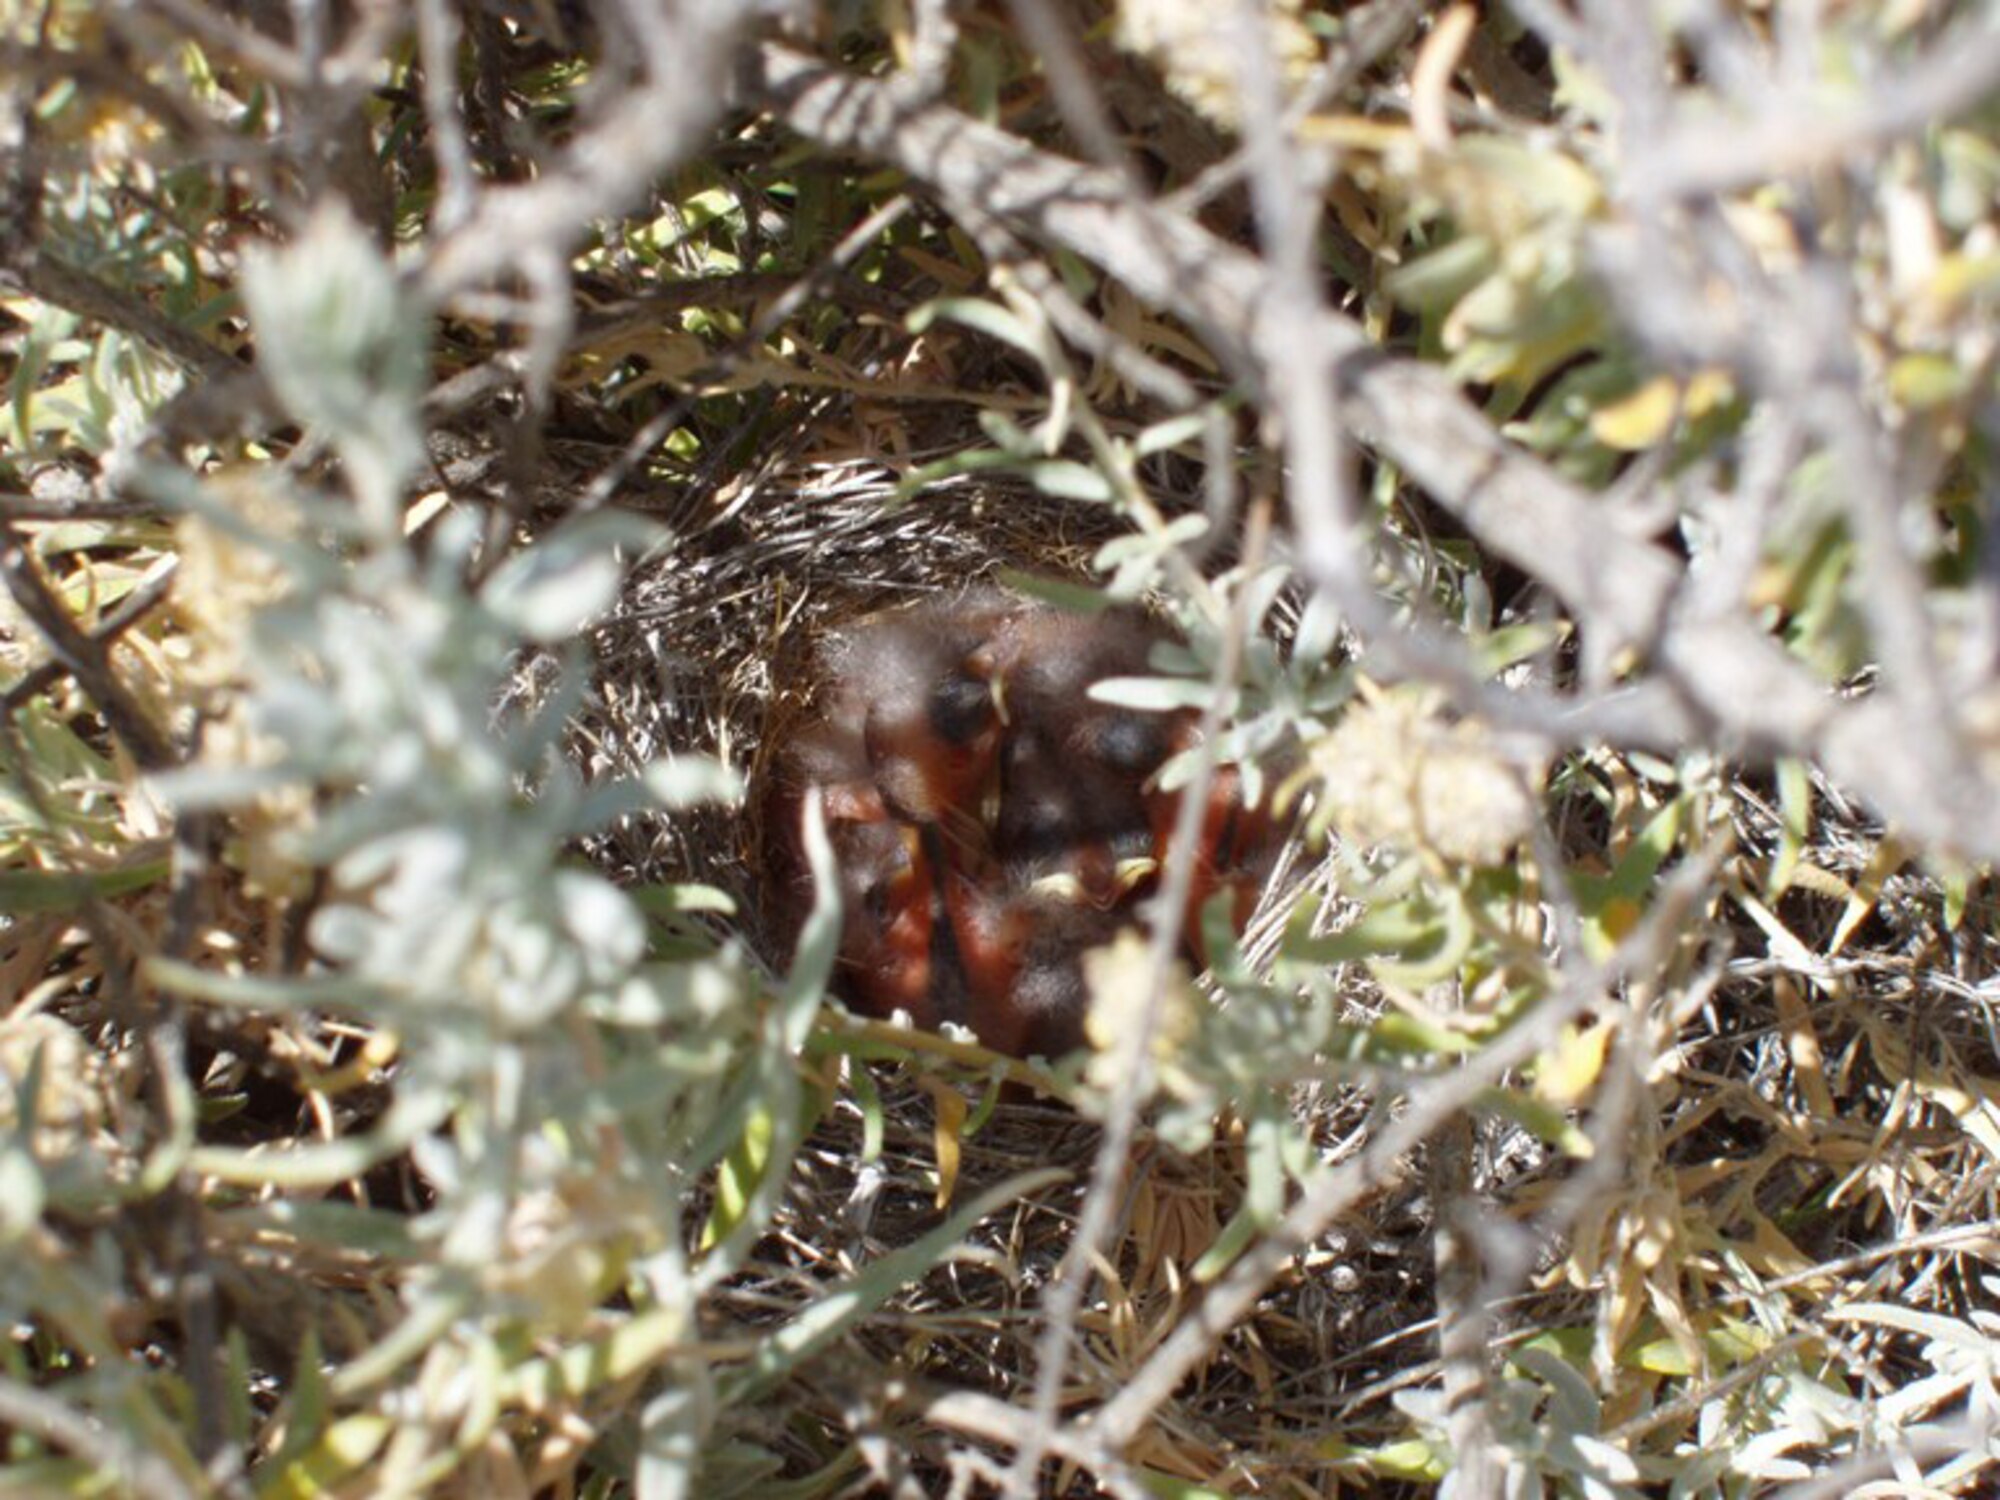 Baby Sage Sparrows in a nest amongst some brush.  (Courtesy photo)